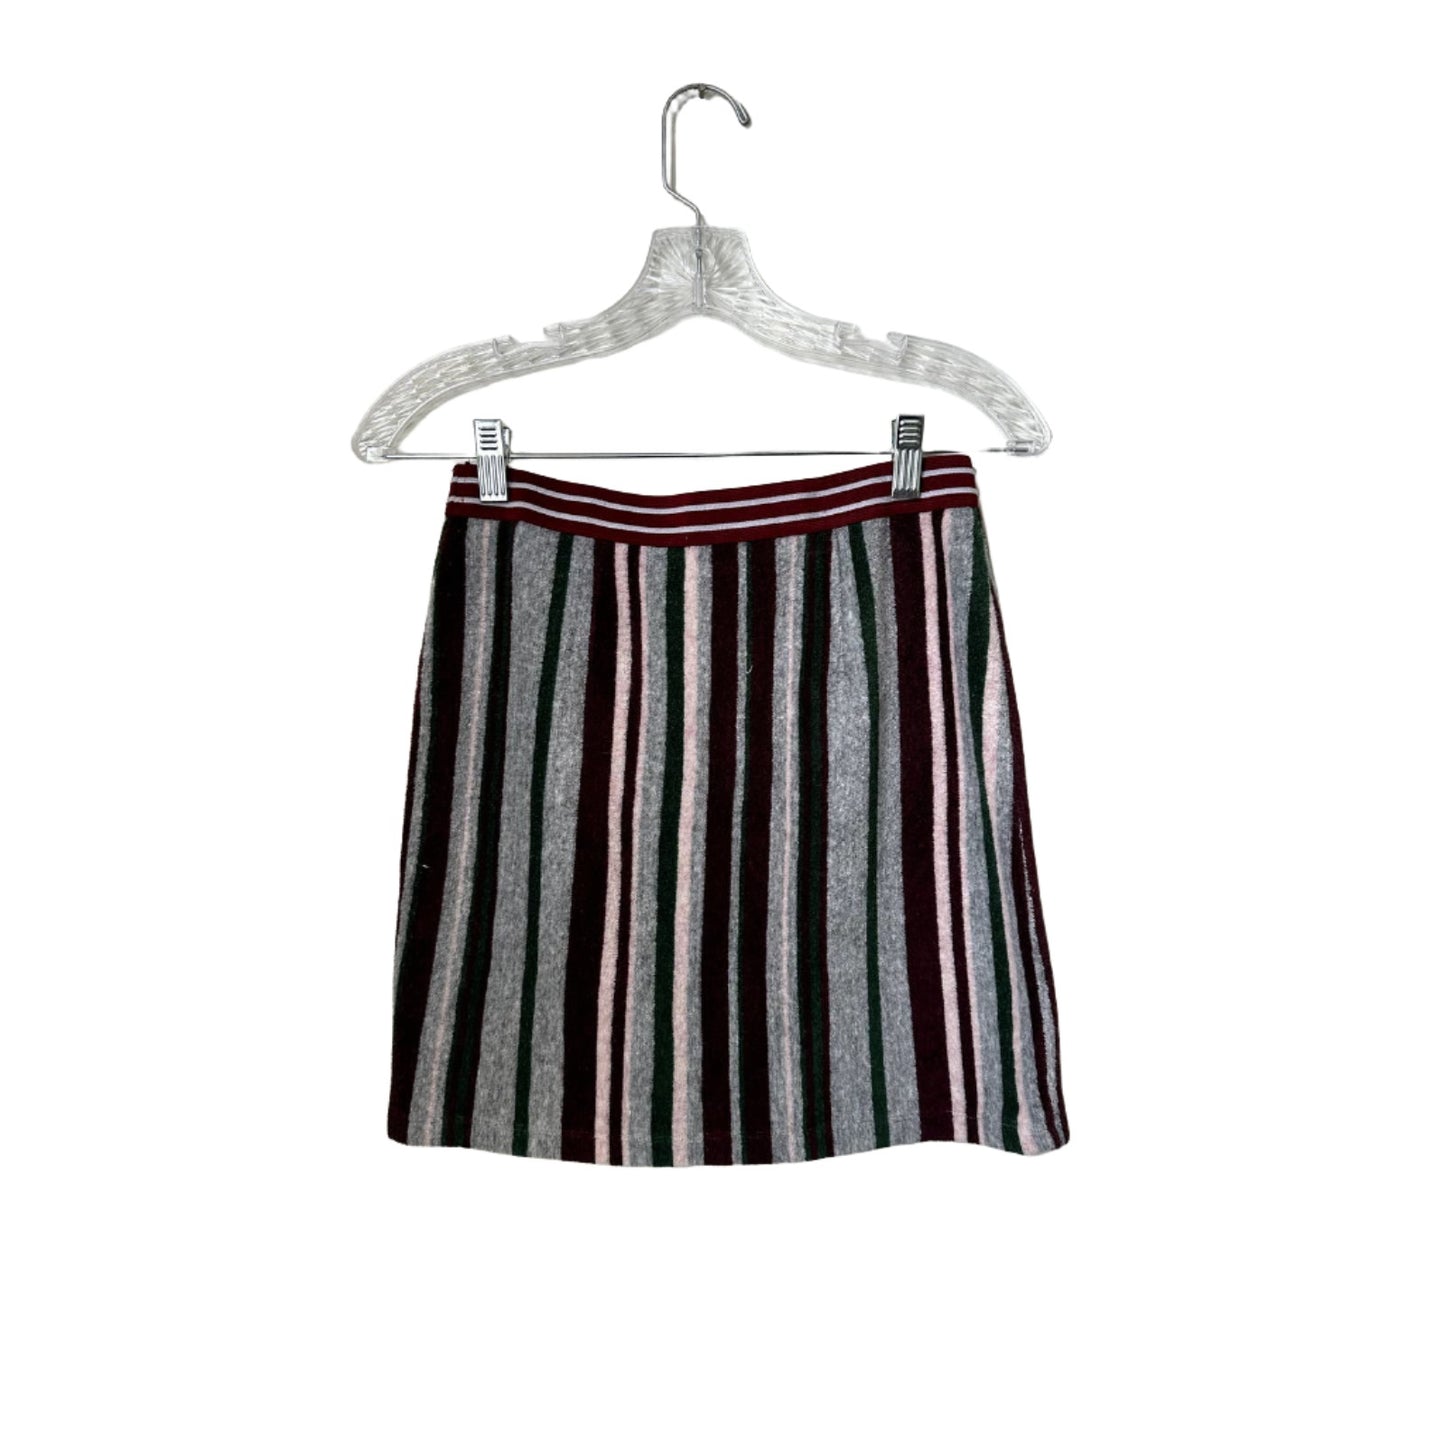 Ecote by Urban Outfitters Terry Cloth Mini Skirt, Size M